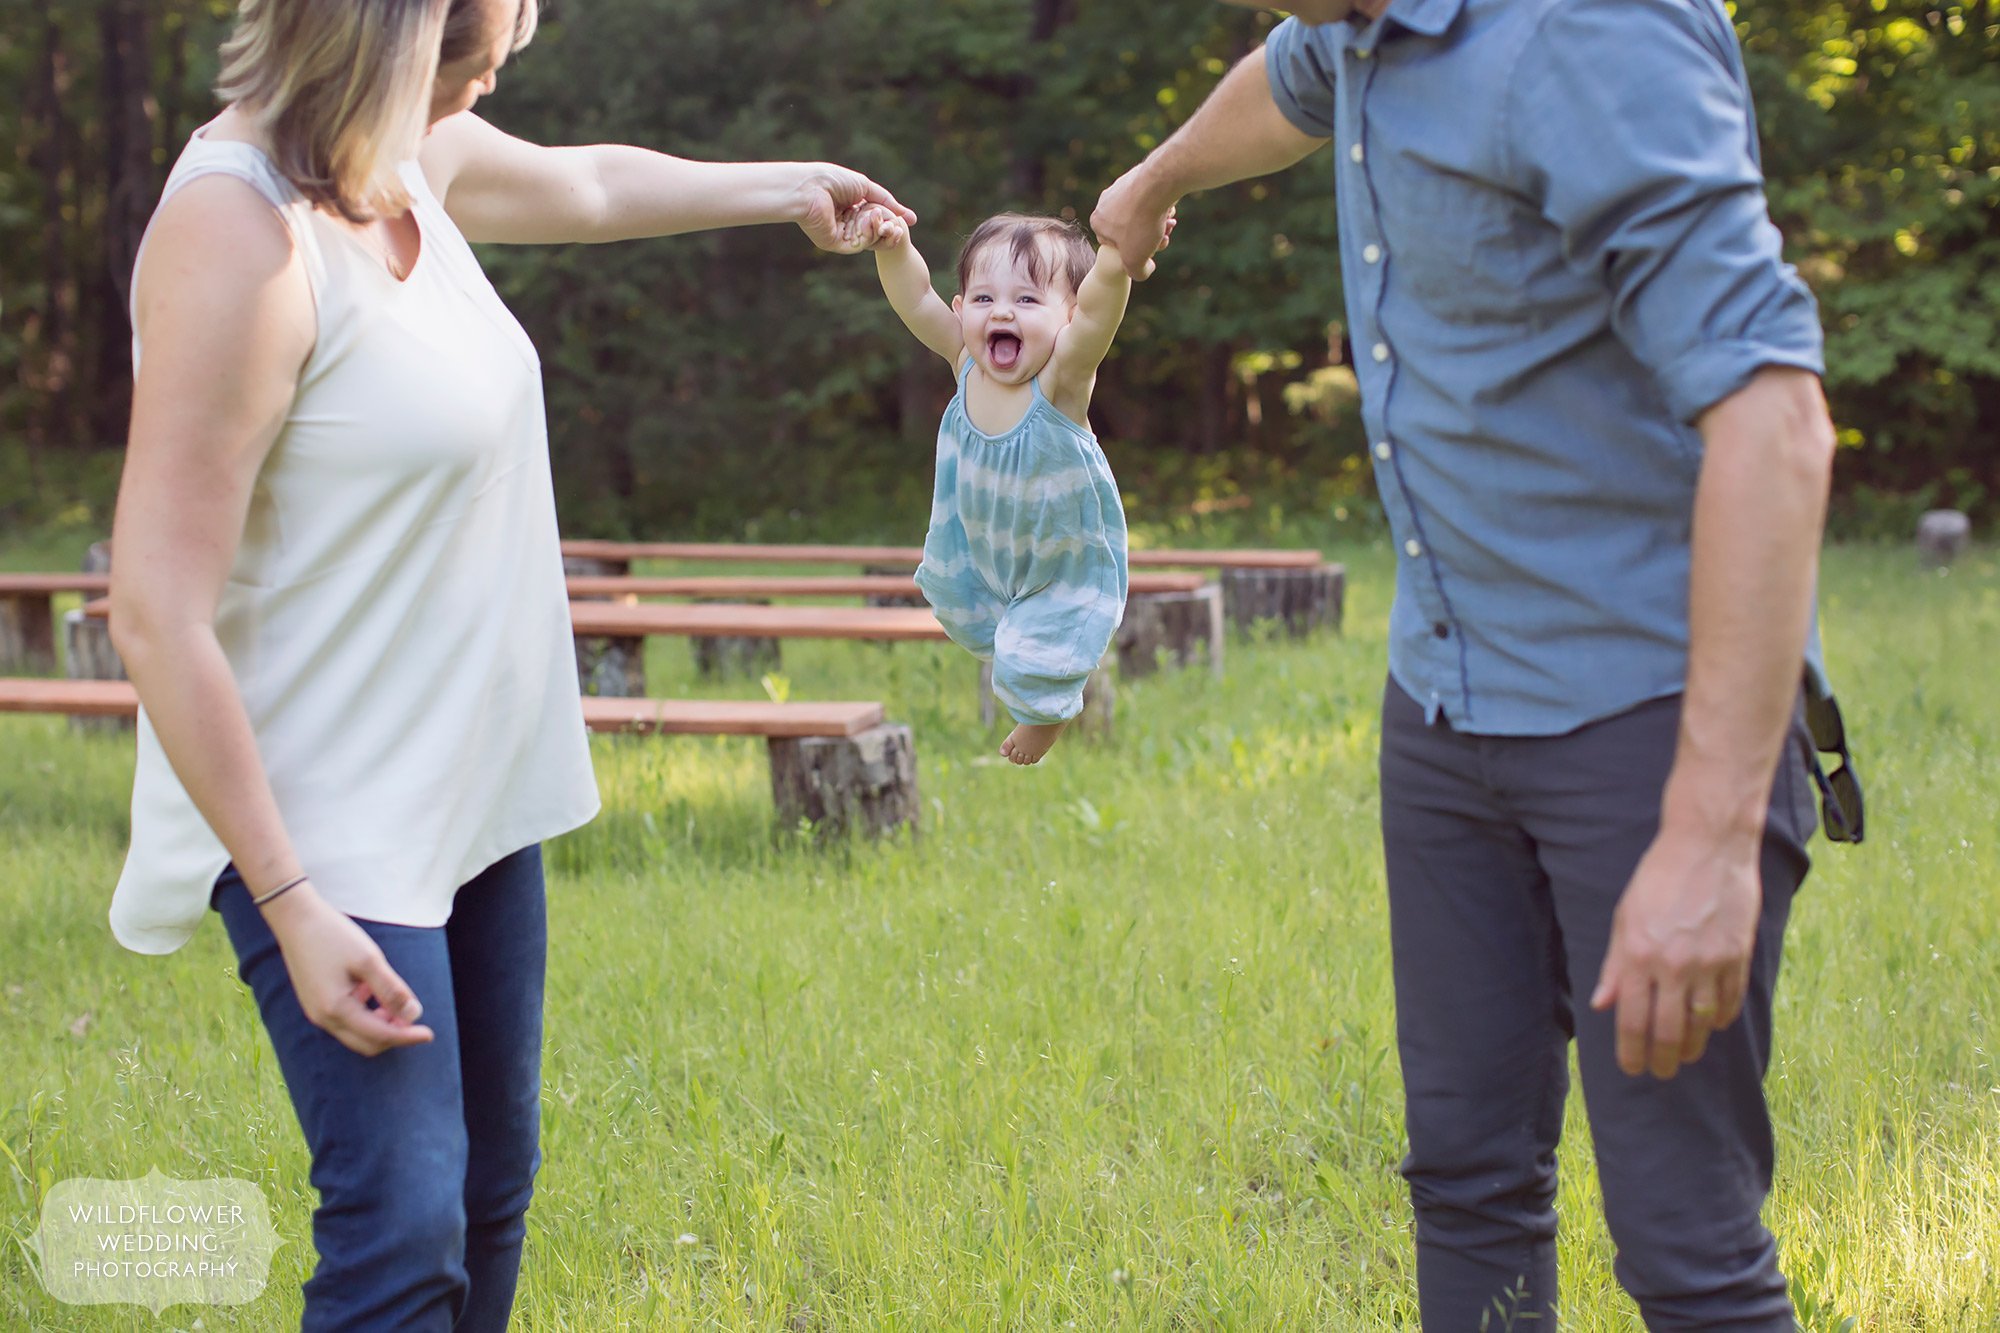 Parents swing their baby in this fun family photography backyard session in Columbia, MO.